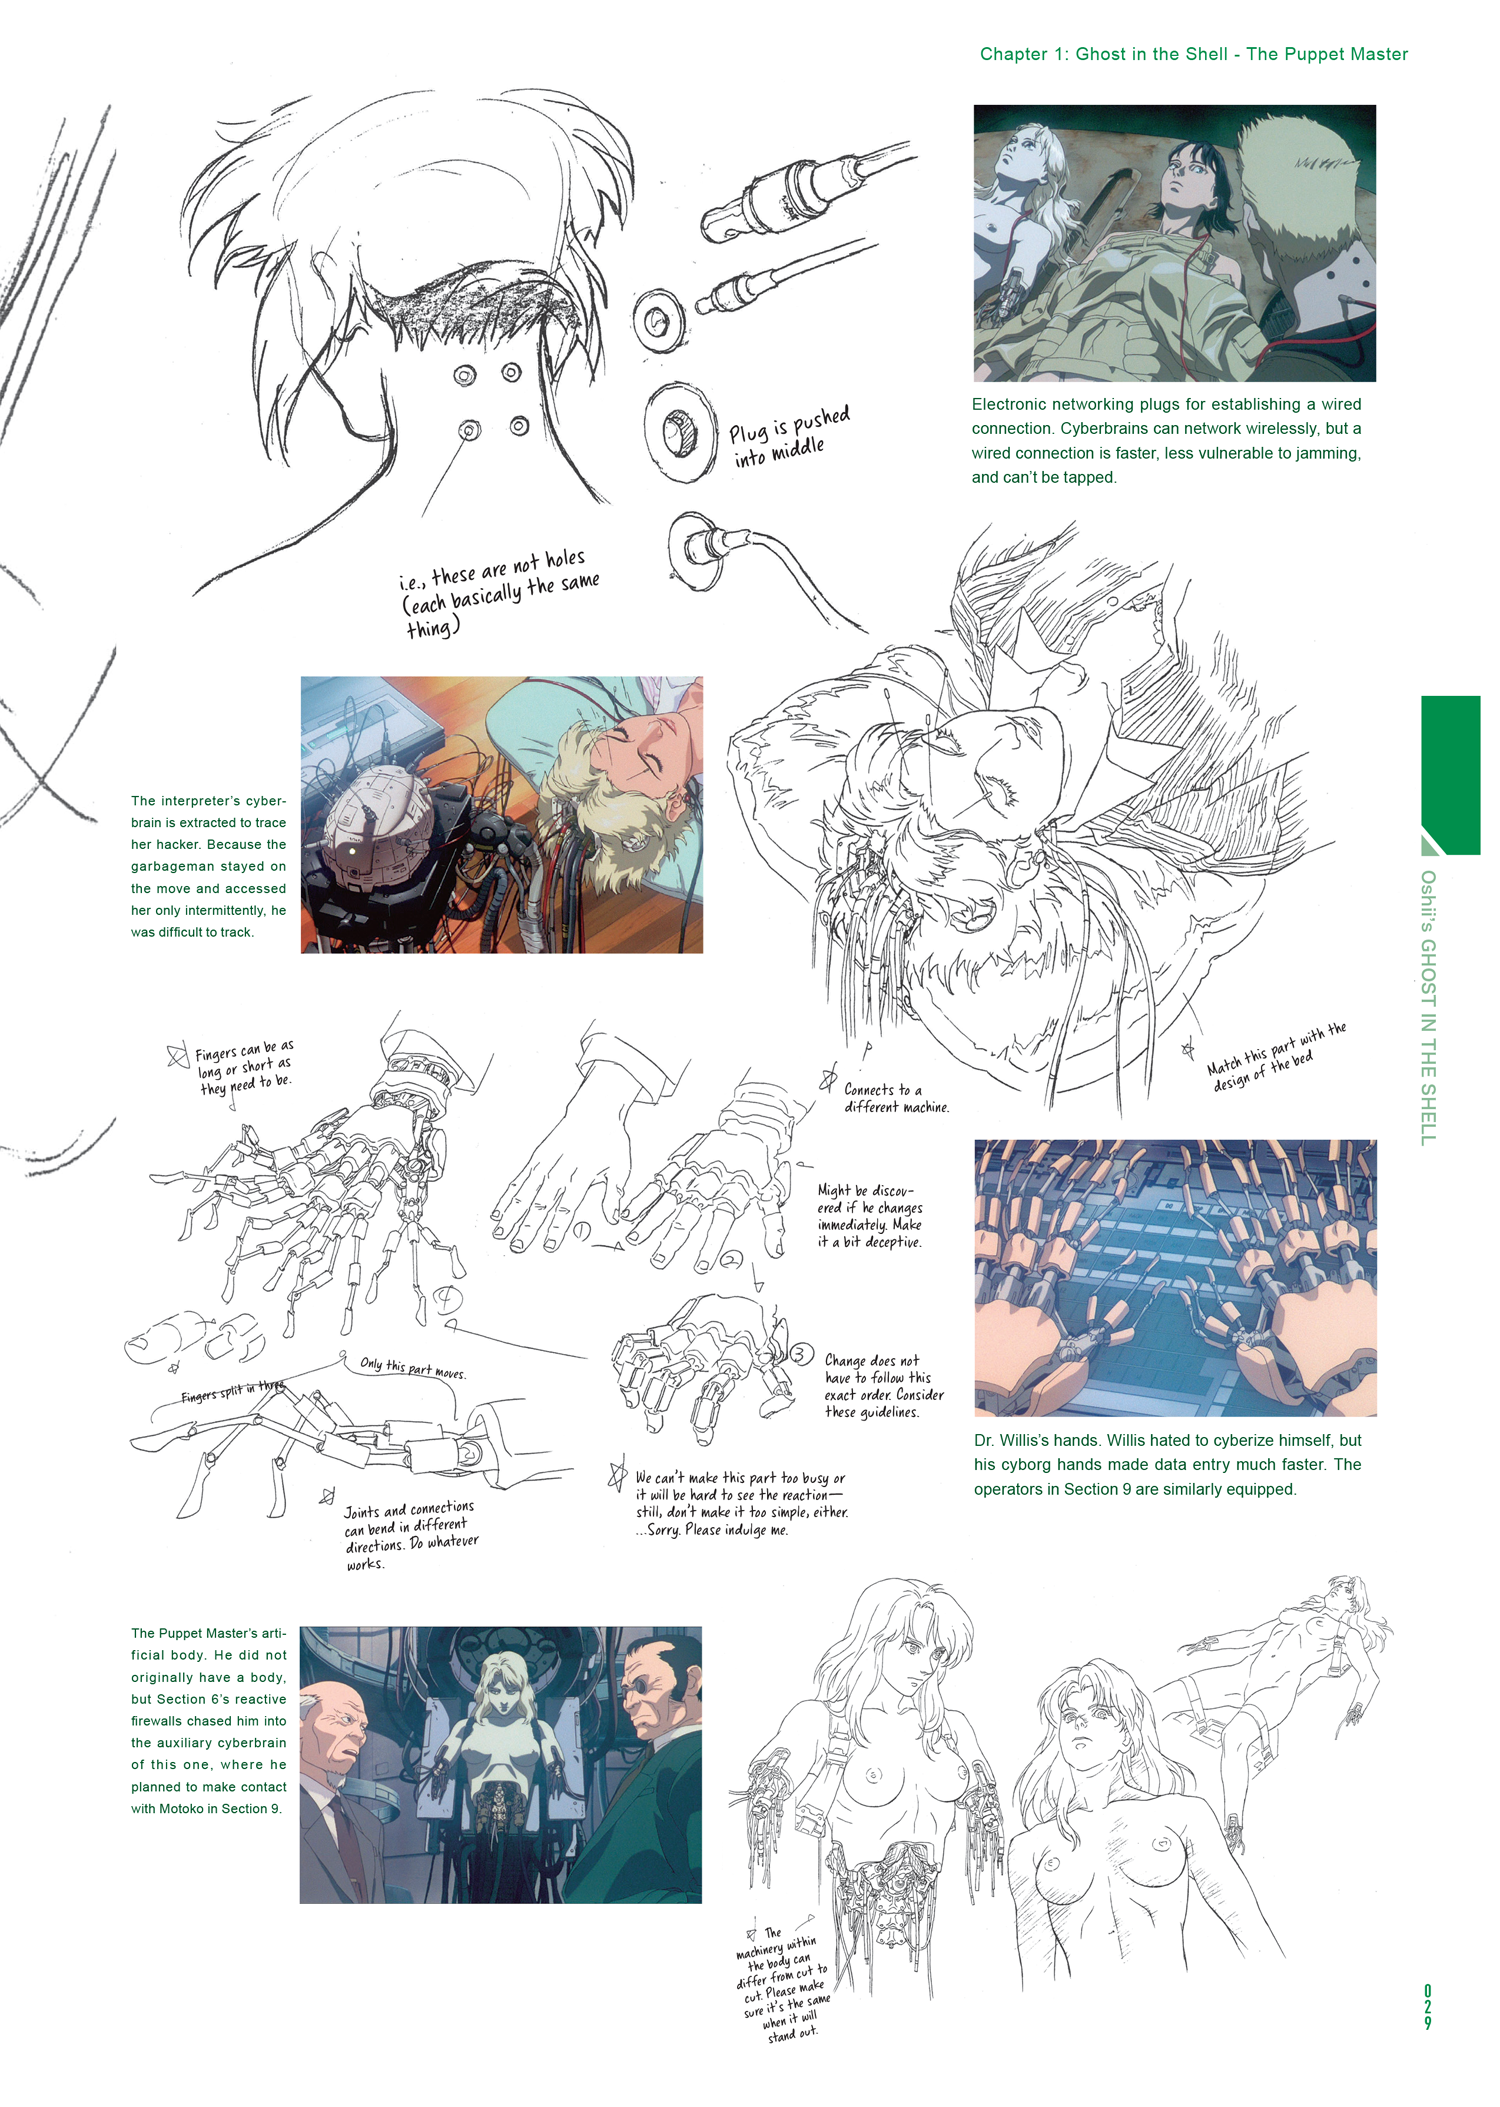 The Stunning Art Behind 20 Years Of Ghost In The Shell Anime